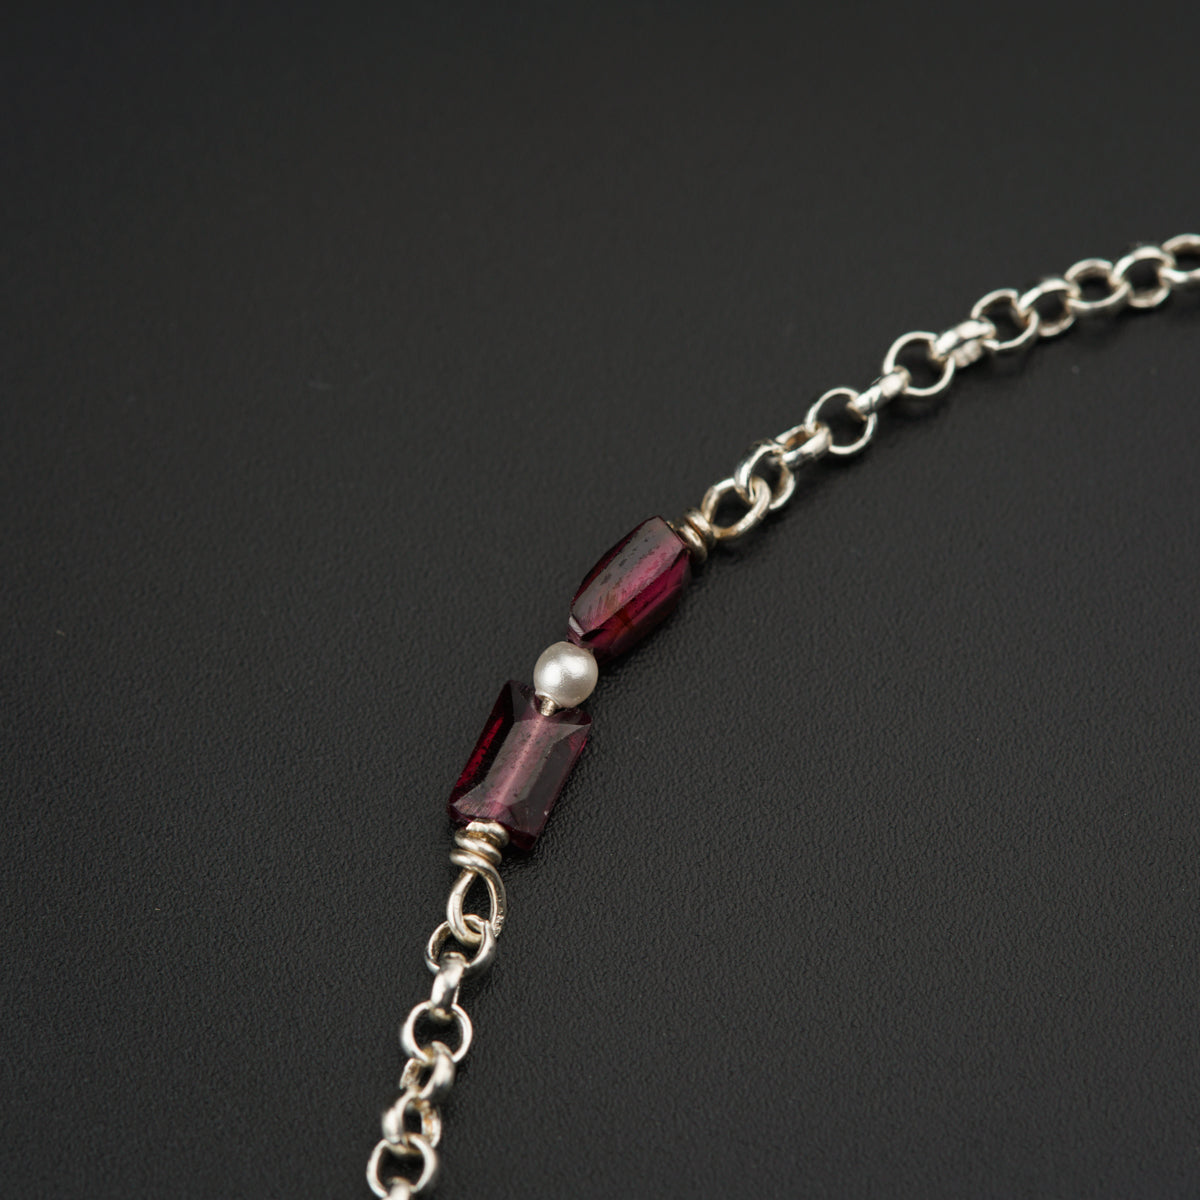 a silver chain with a red glass bead on it